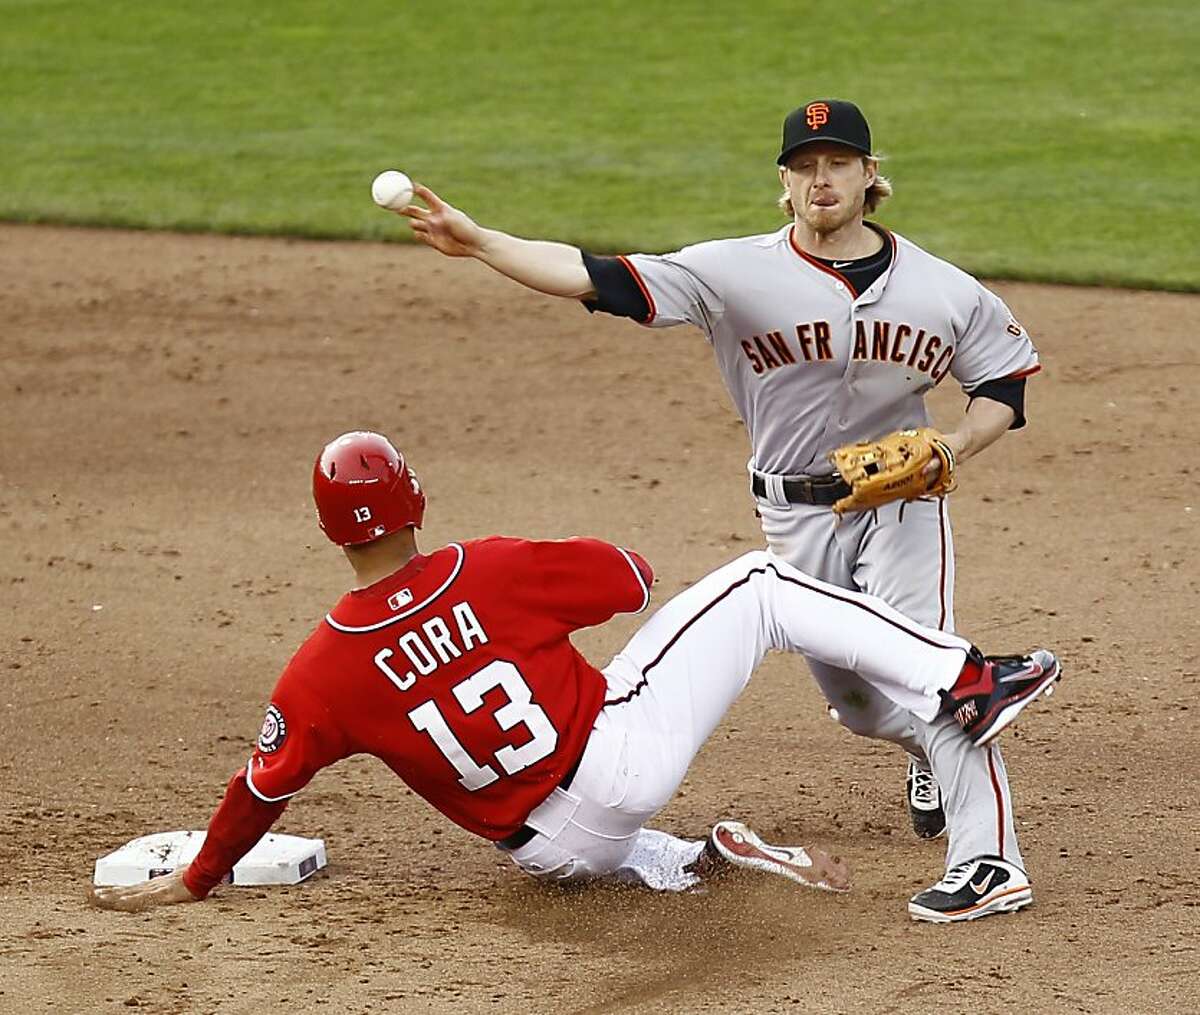 San Francisco Giants shortstop Mike Fontenot attempts a double play as Washington Nationals' Alex Cora (13) is forced out during the ninth inning of an MLB baseball game, Saturday, April 30, 2011 in Washington. The Giants won 2-1. (AP Photo/Luis M. Alvarez)